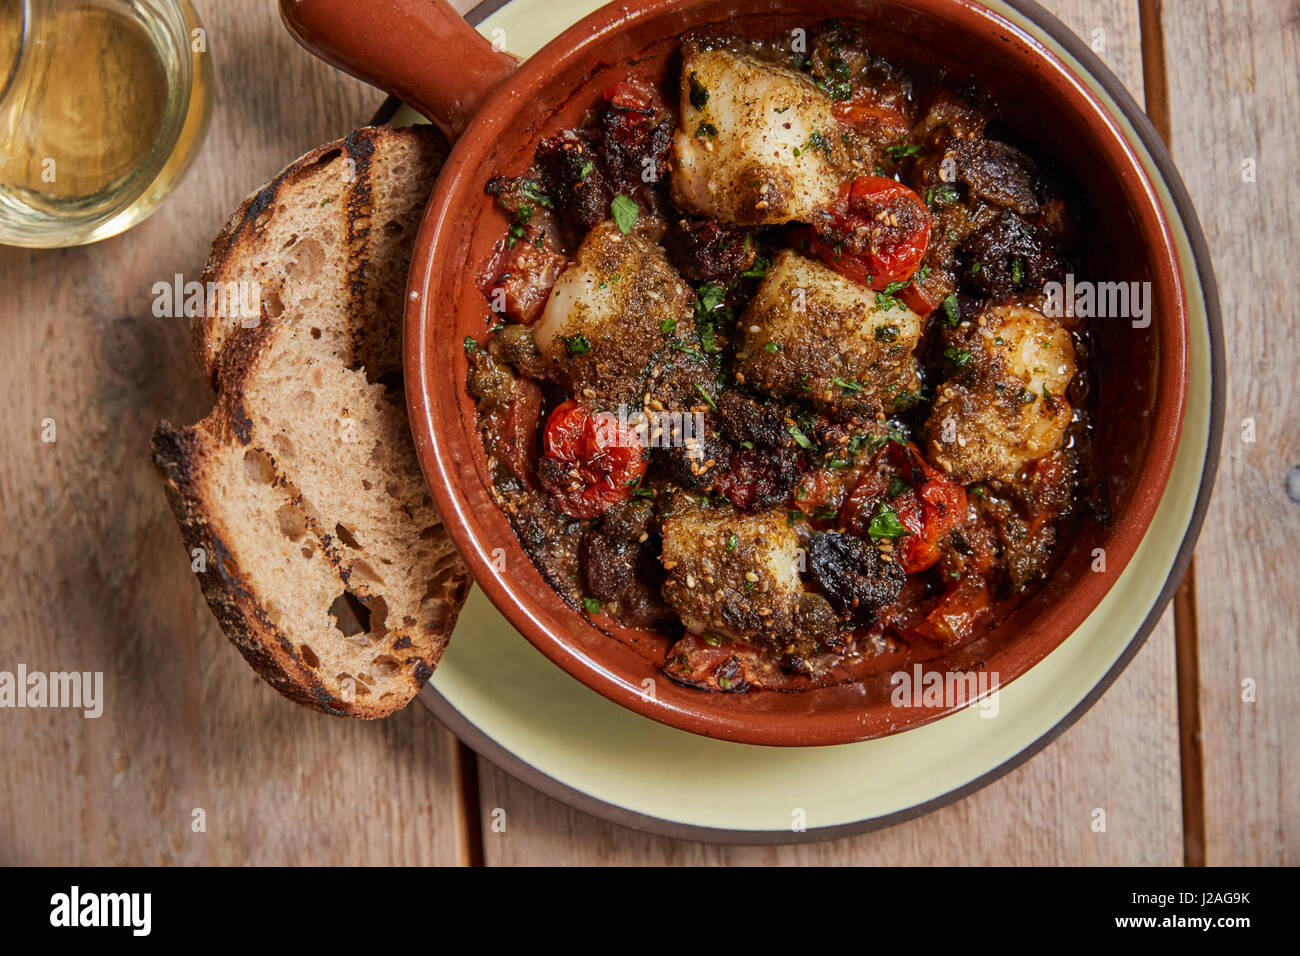 Cod and chorizo bake, grilled sourdough, overhead close up Stock Photo